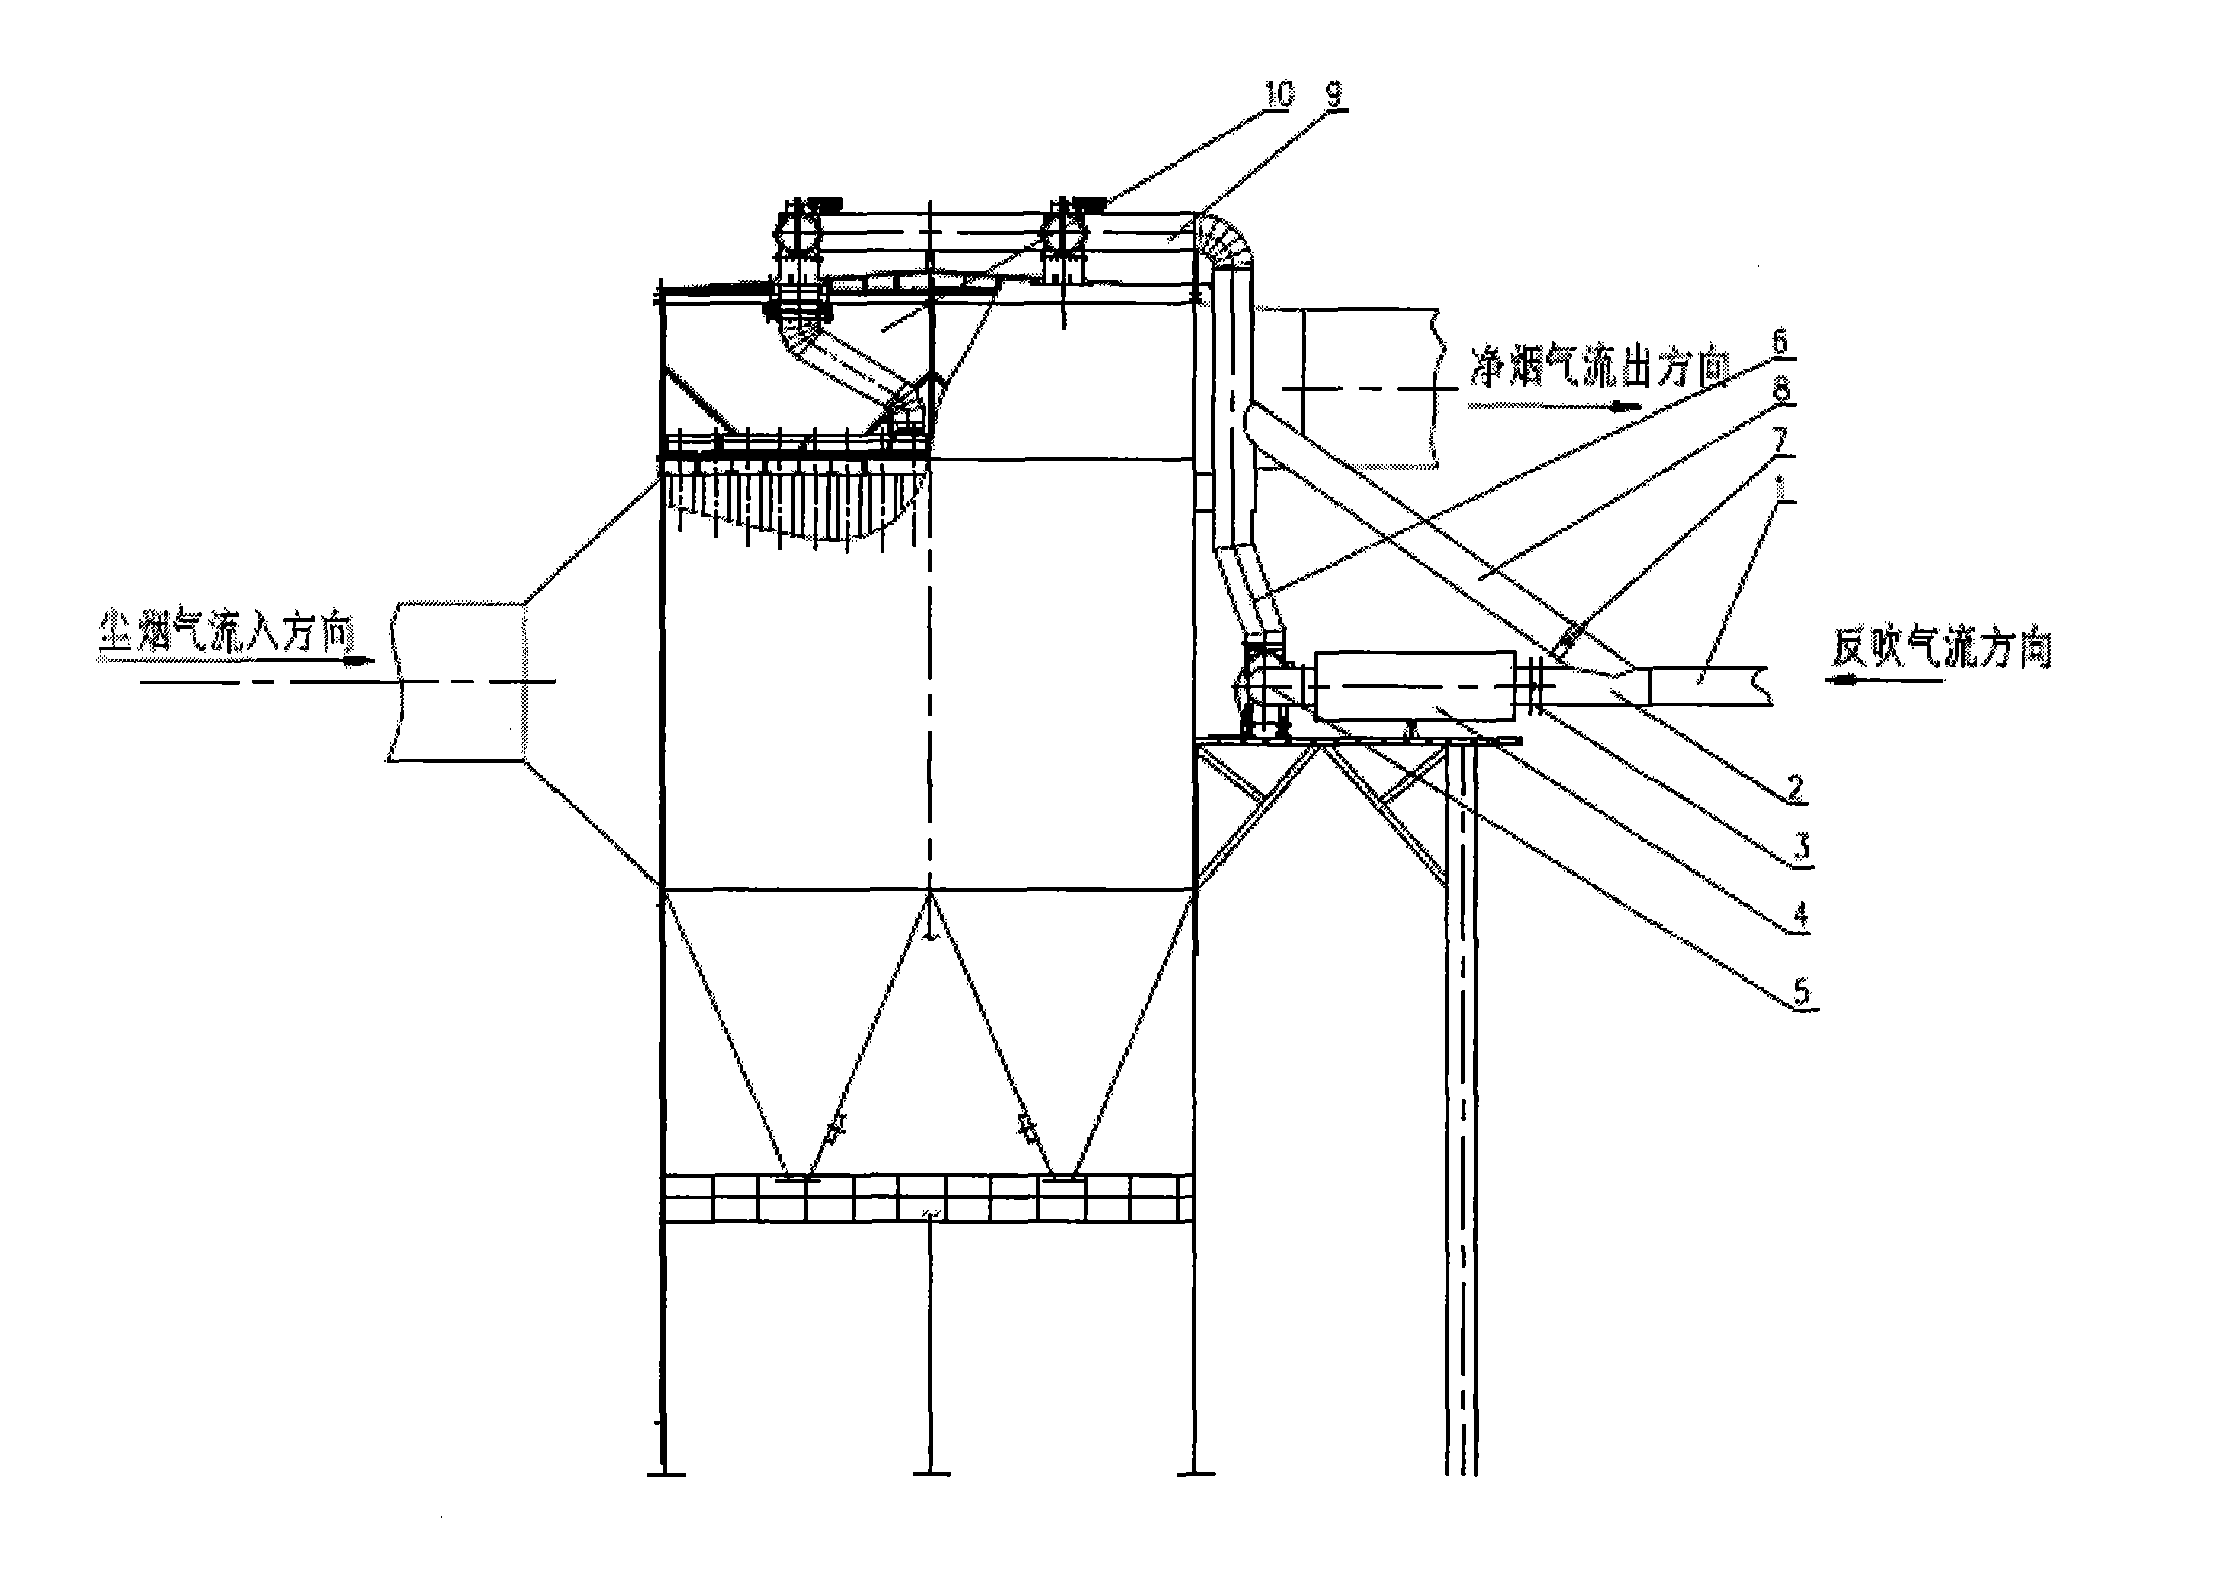 Back-blowing flue gas filtering system and operating method thereof